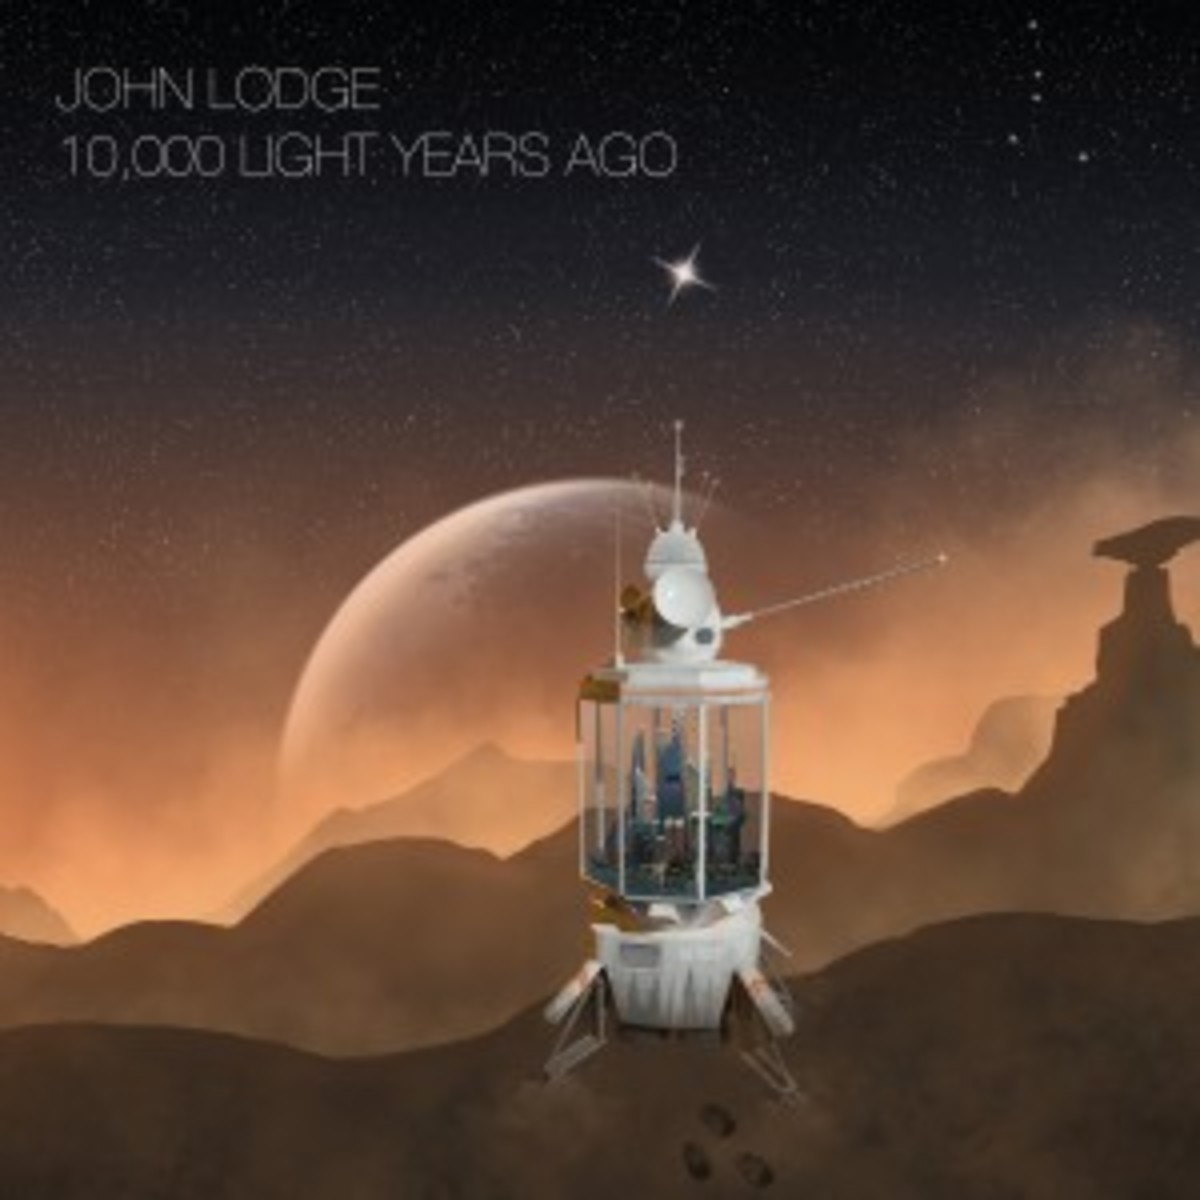 joh_lodge_cover-300x300